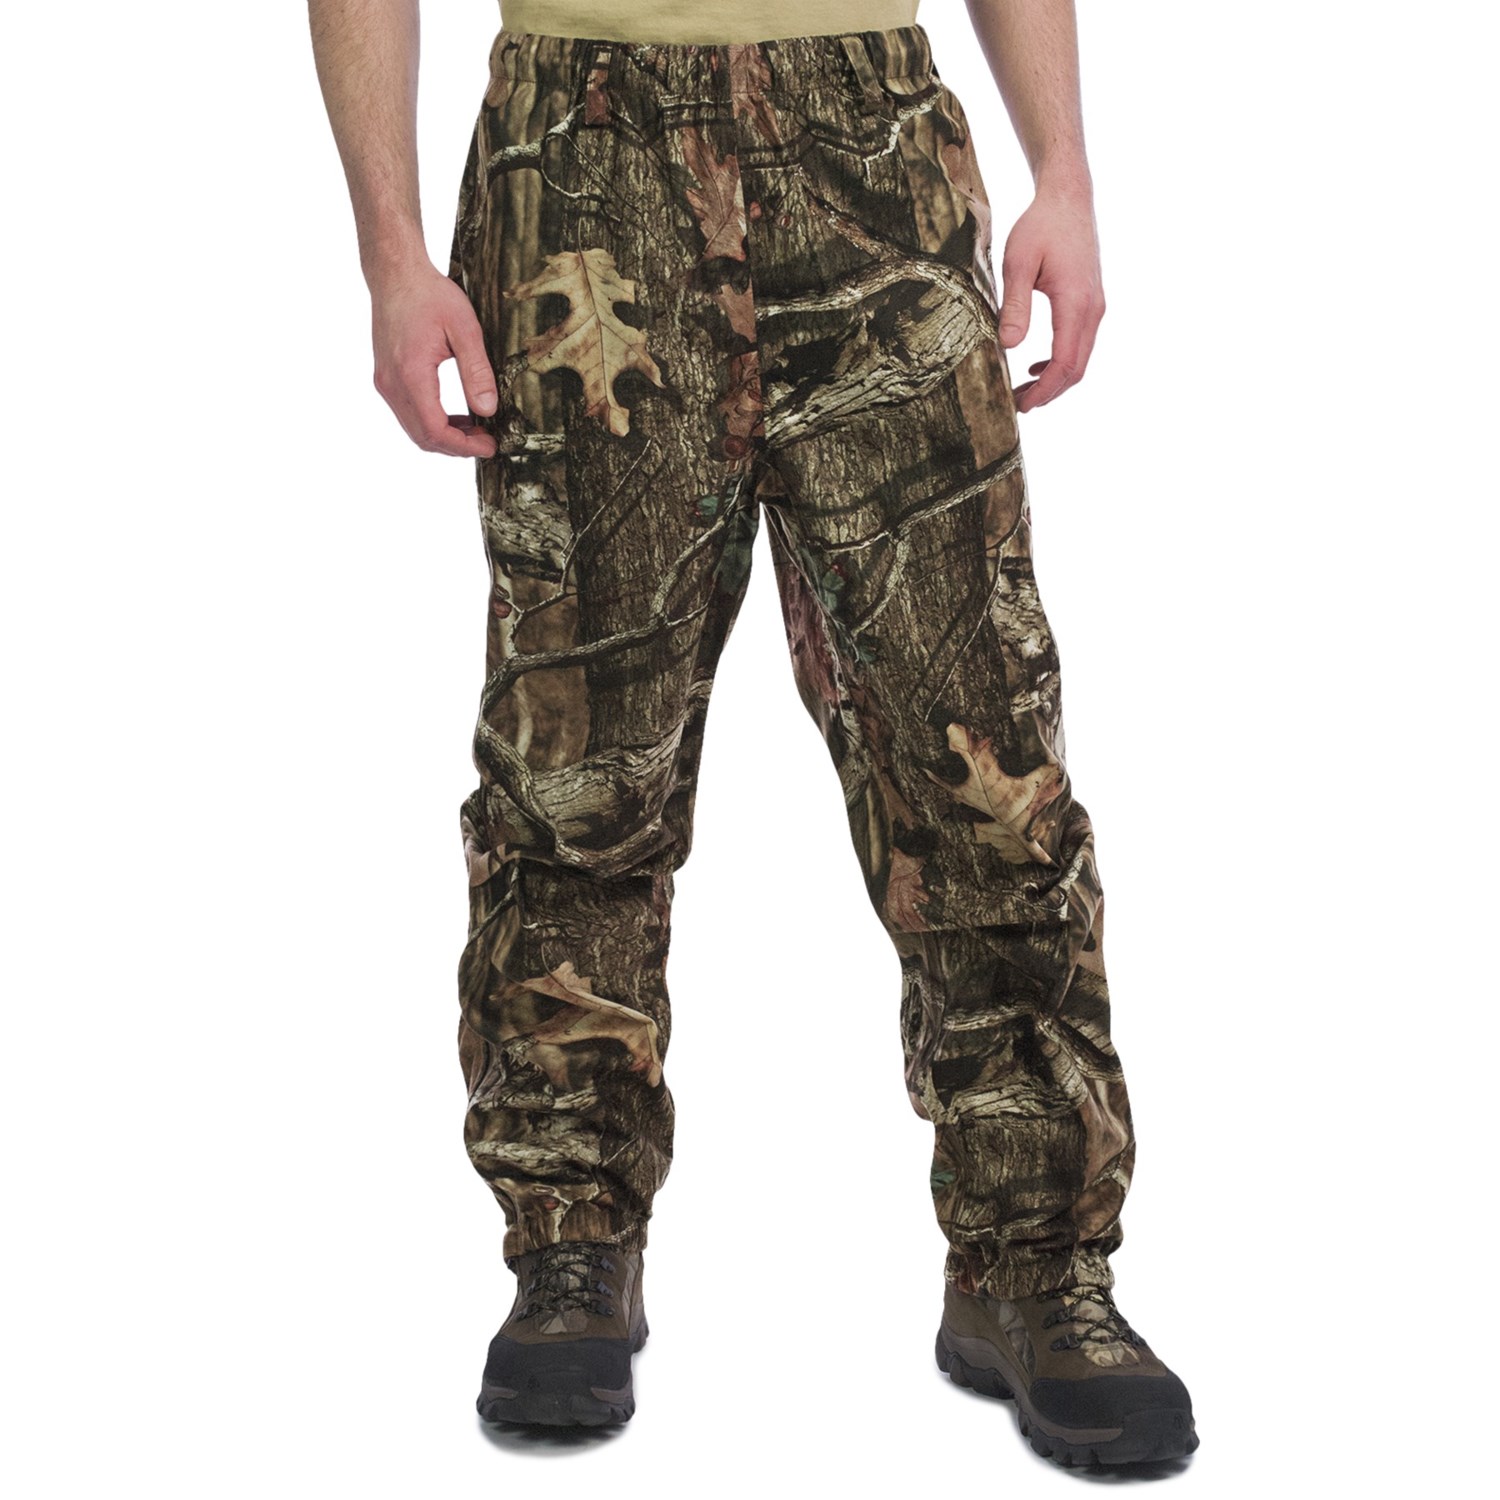 Browning Deluge HMX Lightweight Camo Pants (For Men) - Save 31%